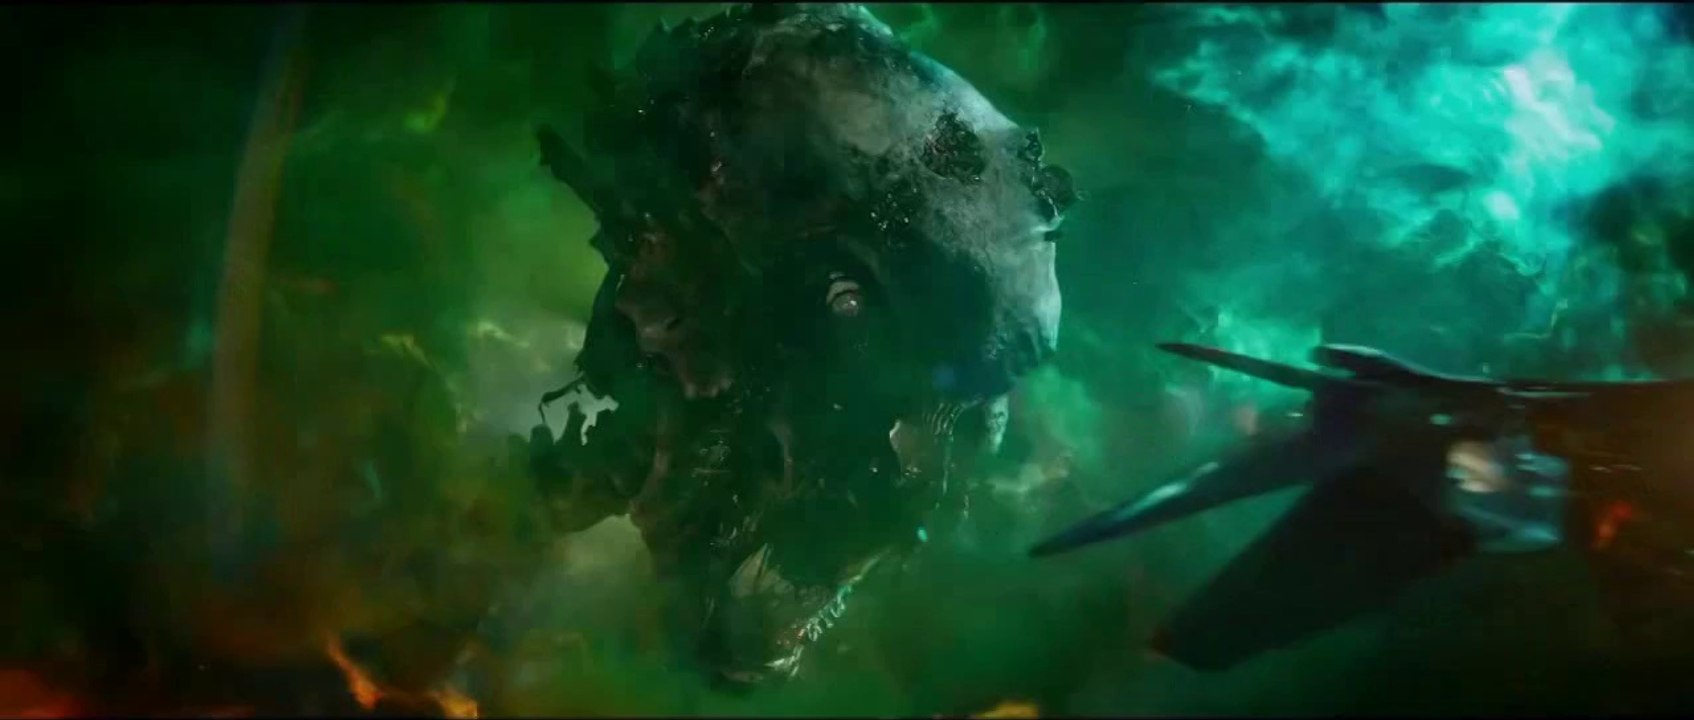 'Guardians of the Galaxy' (2014) Cherry Bomb Trailer